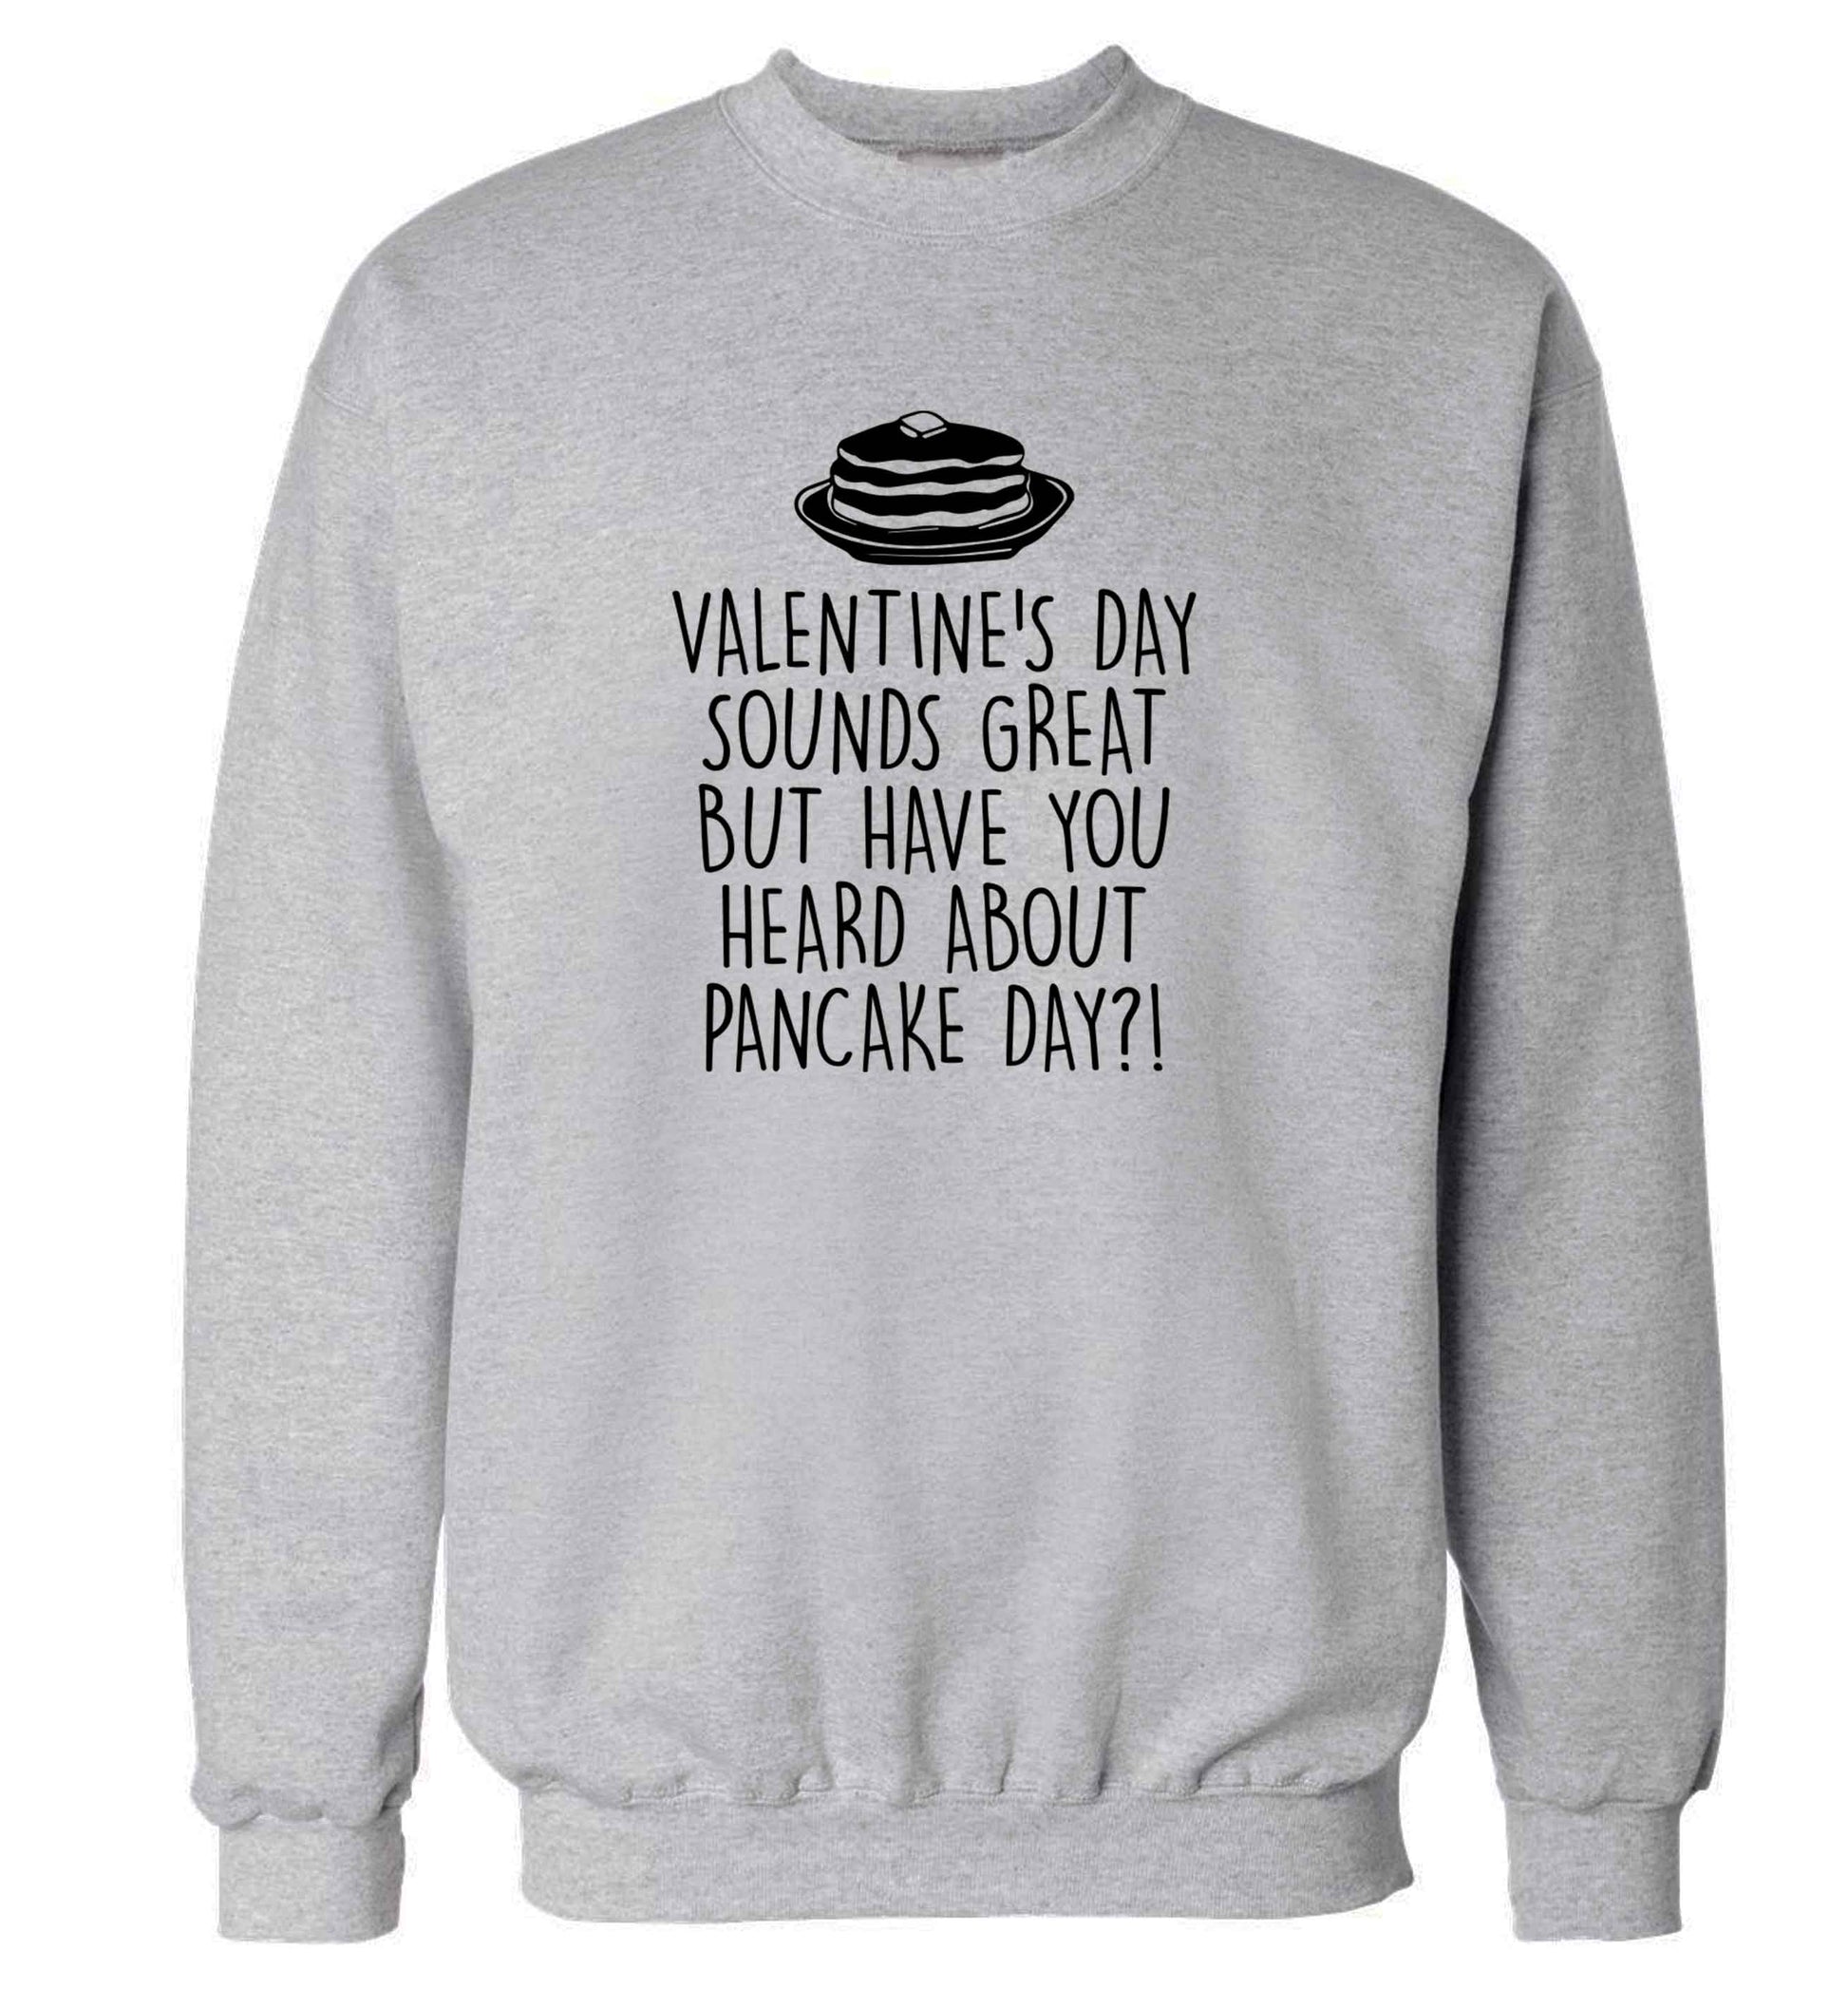 Valentine's day sounds great but have you heard about pancake day?! adult's unisex grey sweater 2XL